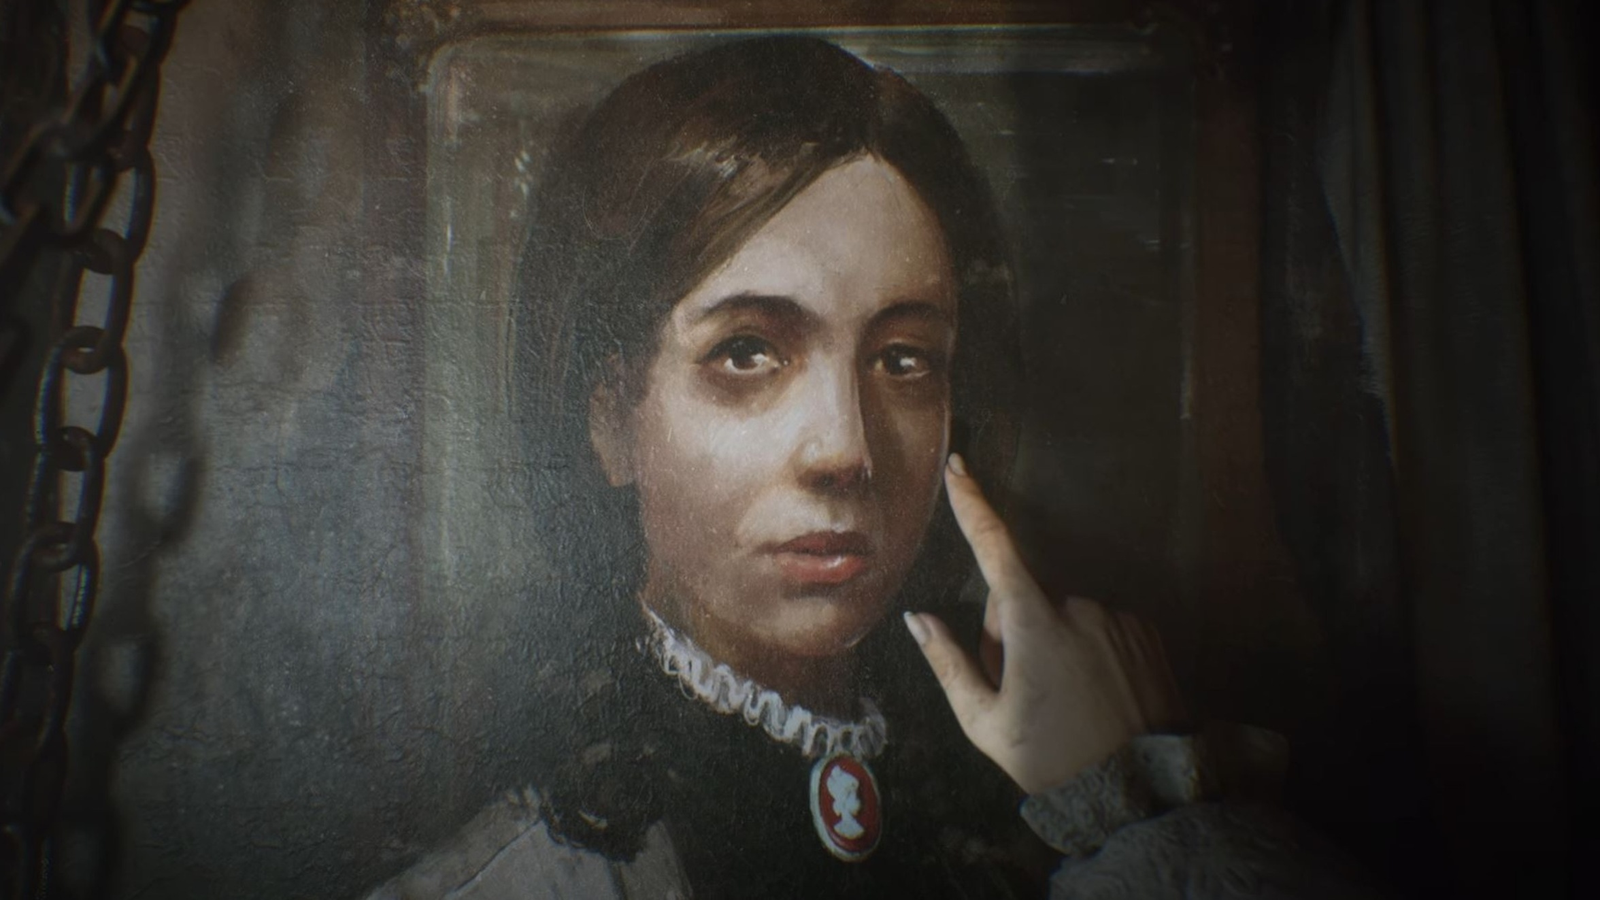 Prepare for chills: Layers of Fear returns with a June 15 release